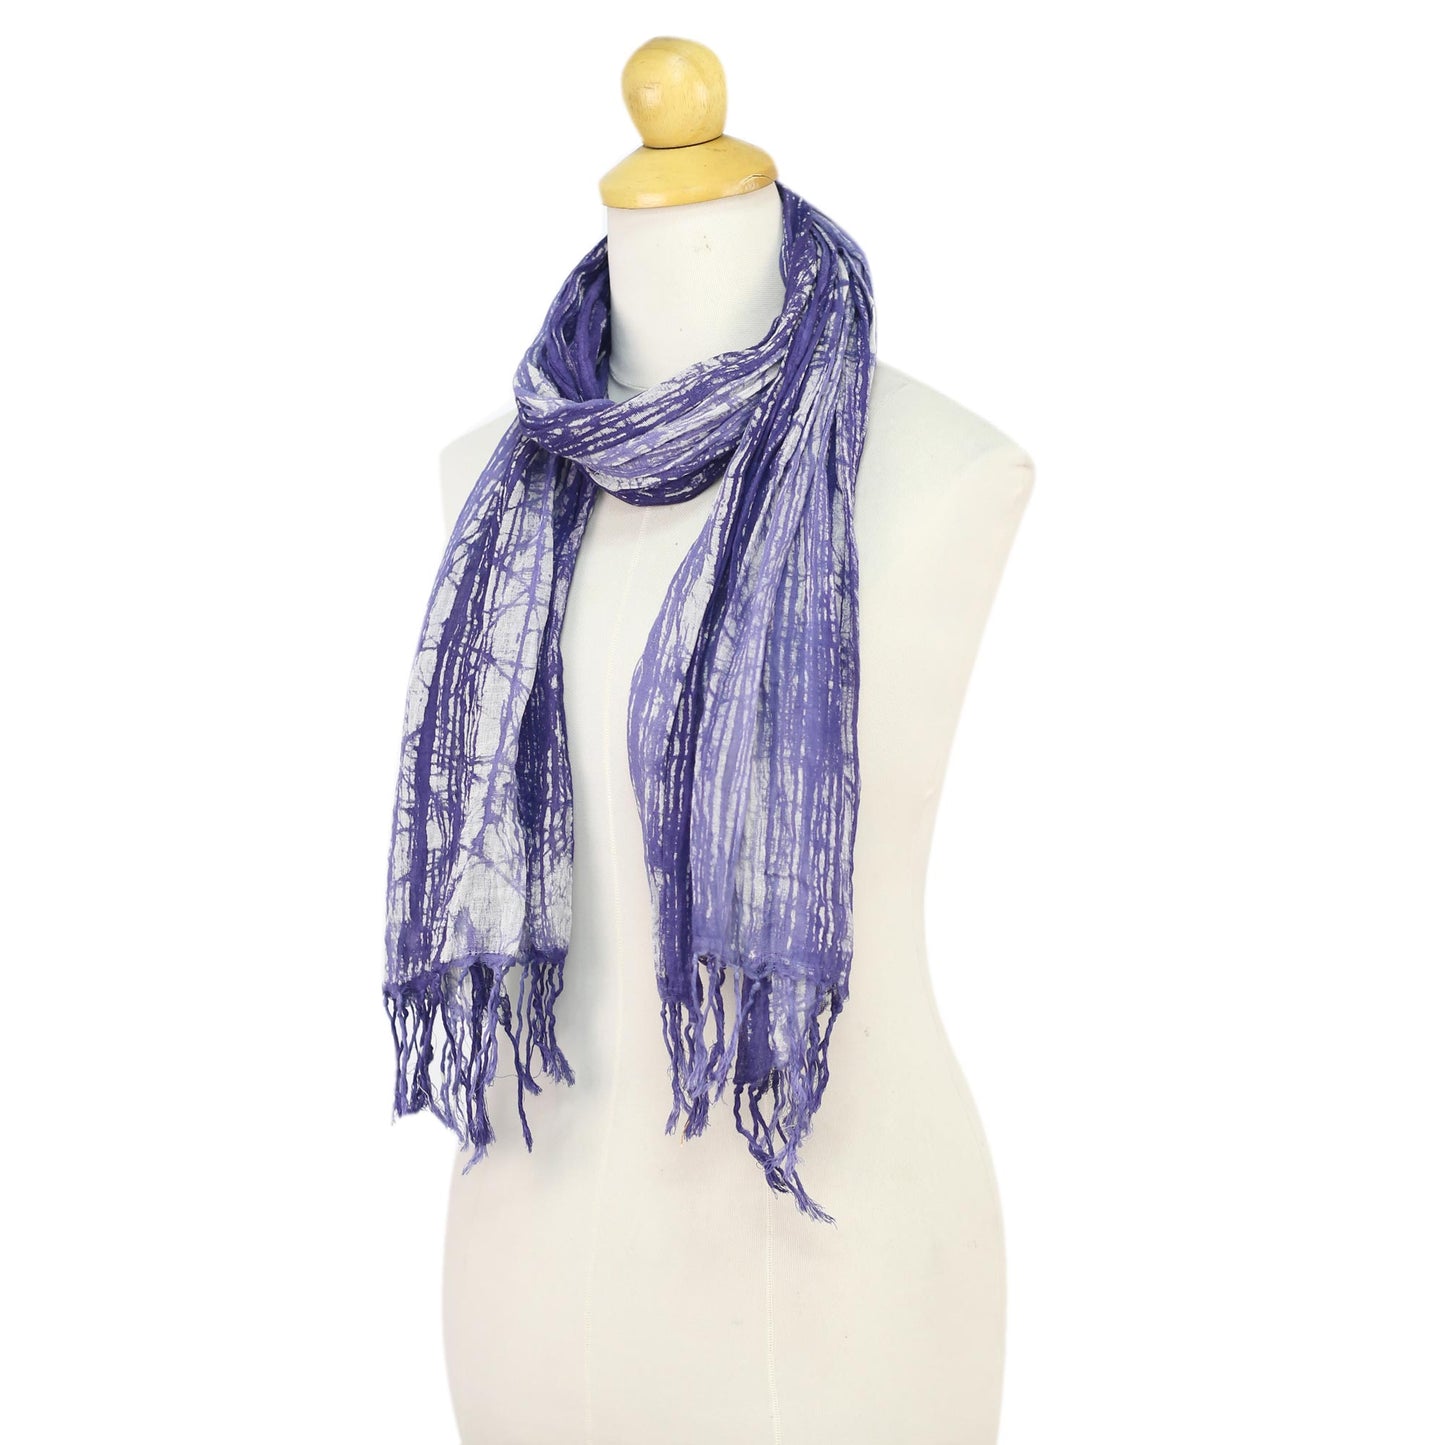 Speckled Field in Iris Batik Tie-Dyed Cotton Scarf in Blue-Violet from Thailand